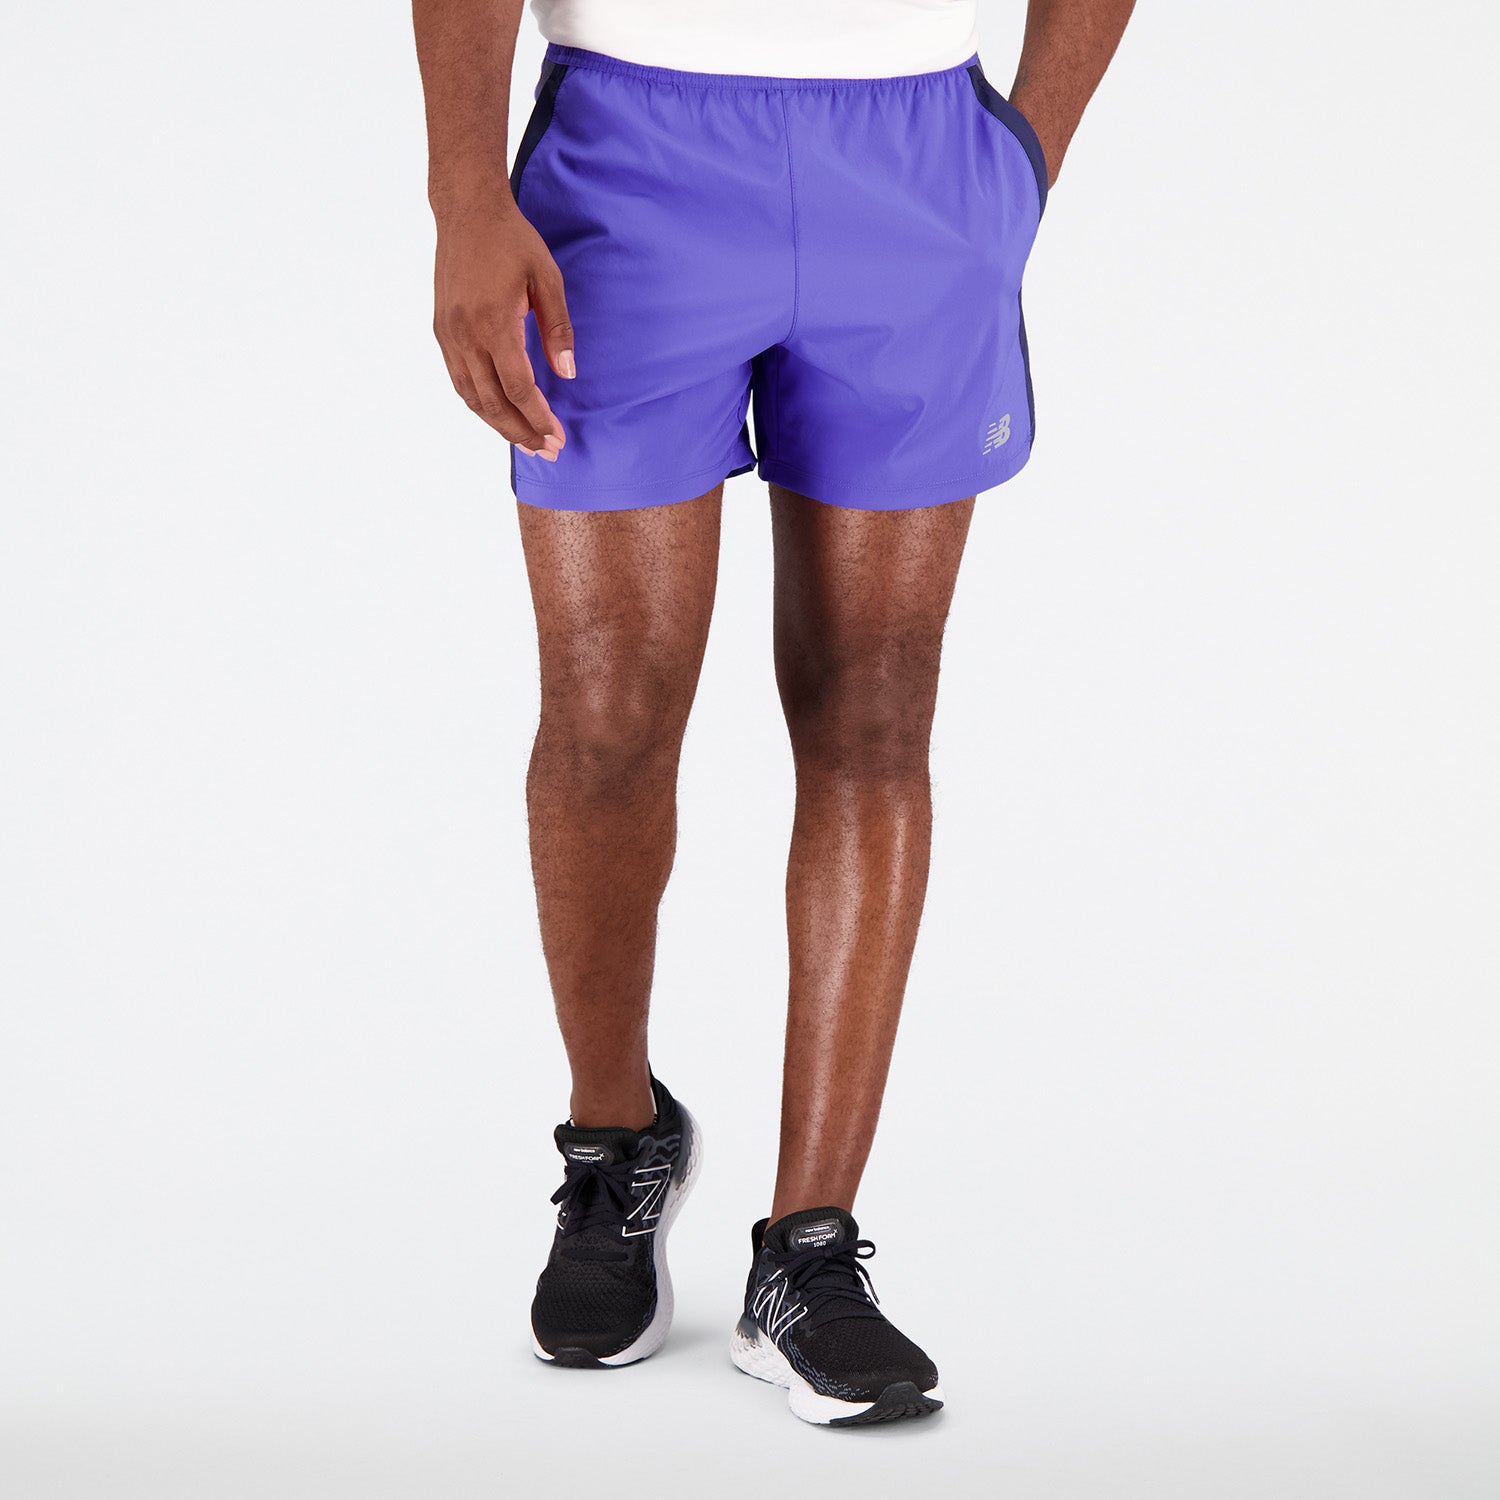 Shop Mens Accelerate 5 Inch Short From New Balance Online - GO SPORT UAE